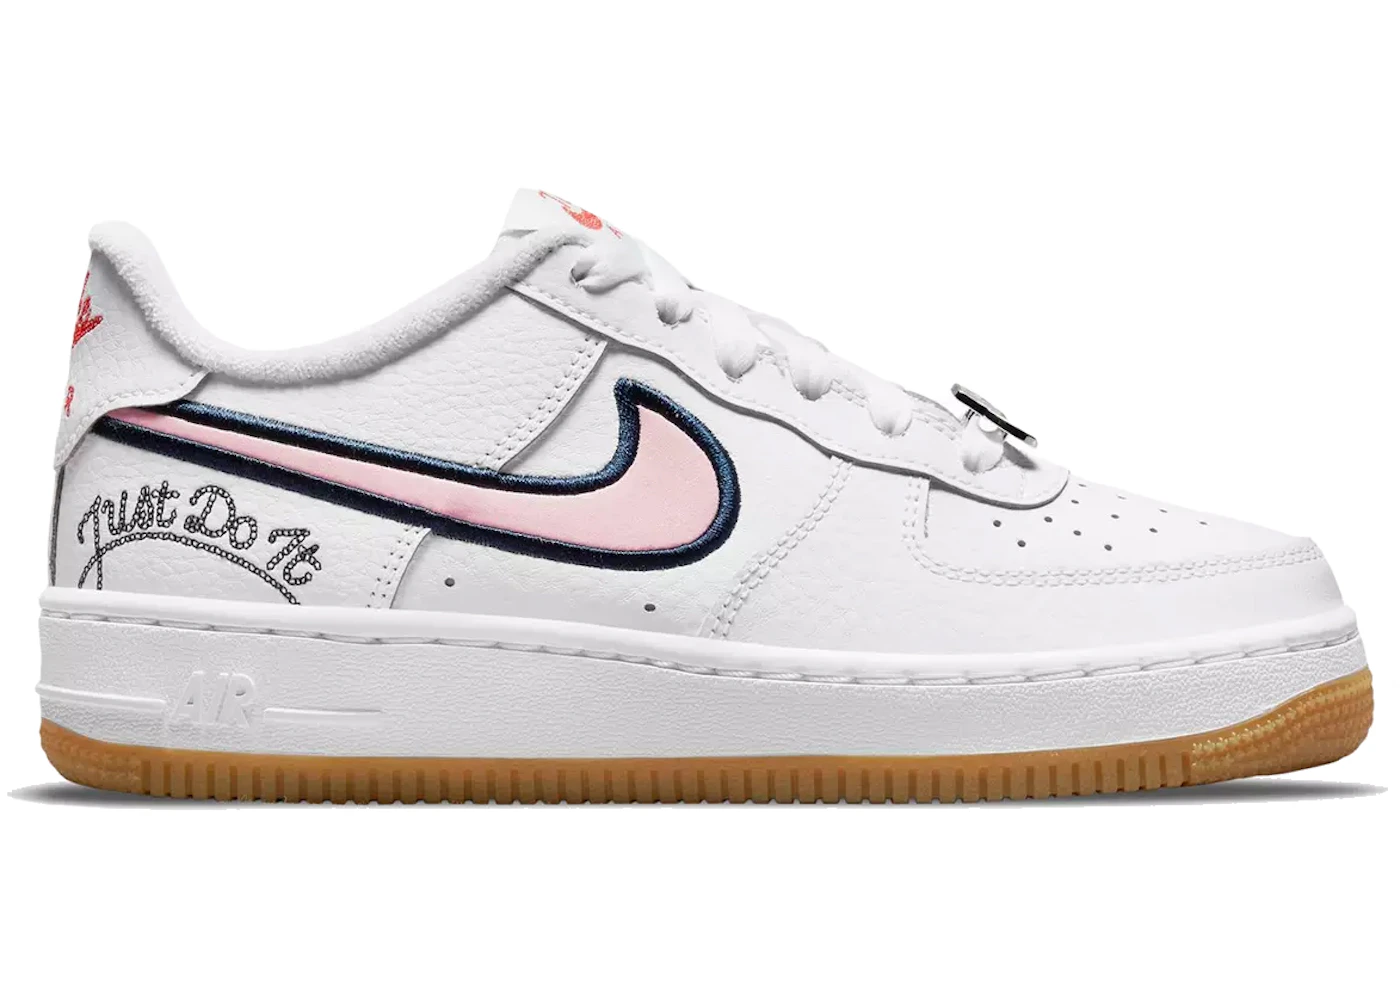 Starting point hurt Photoelectric Nike Air Force 1 Low LV8 Just Do It White Pink Glaze (GS) - DB4542-100